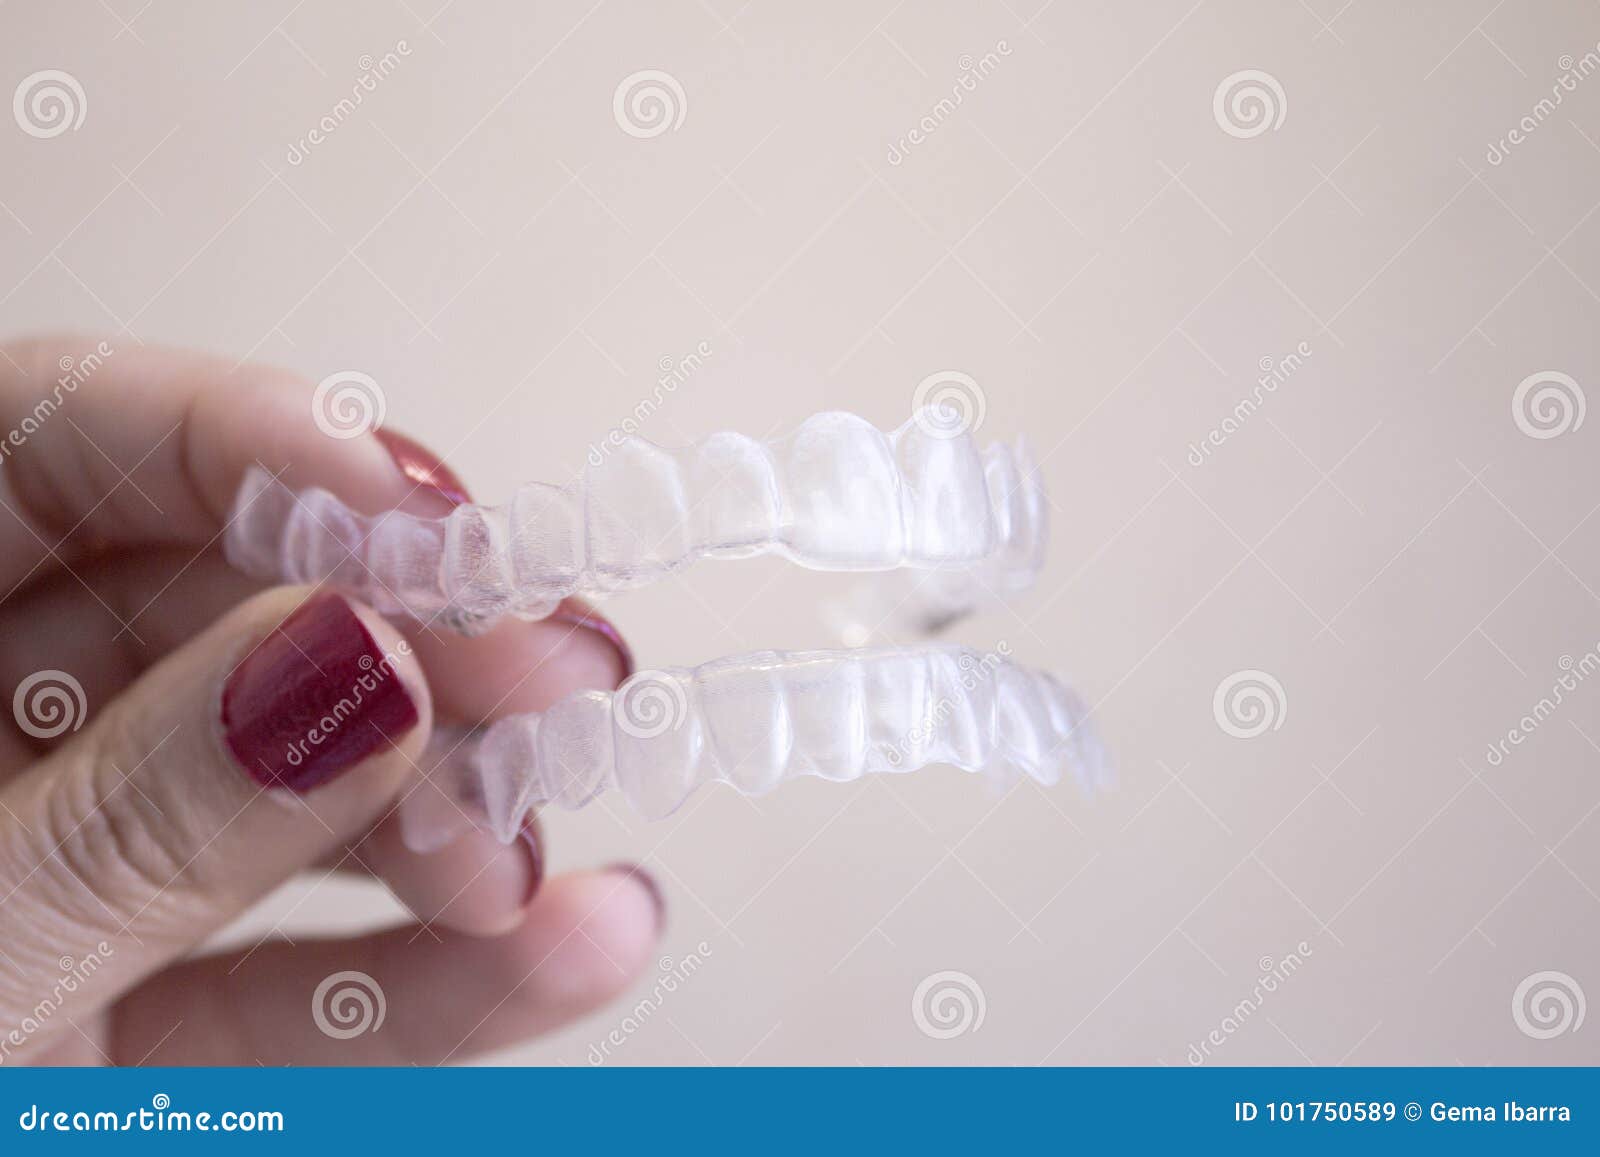 invisible dental orthodontics held by a woman